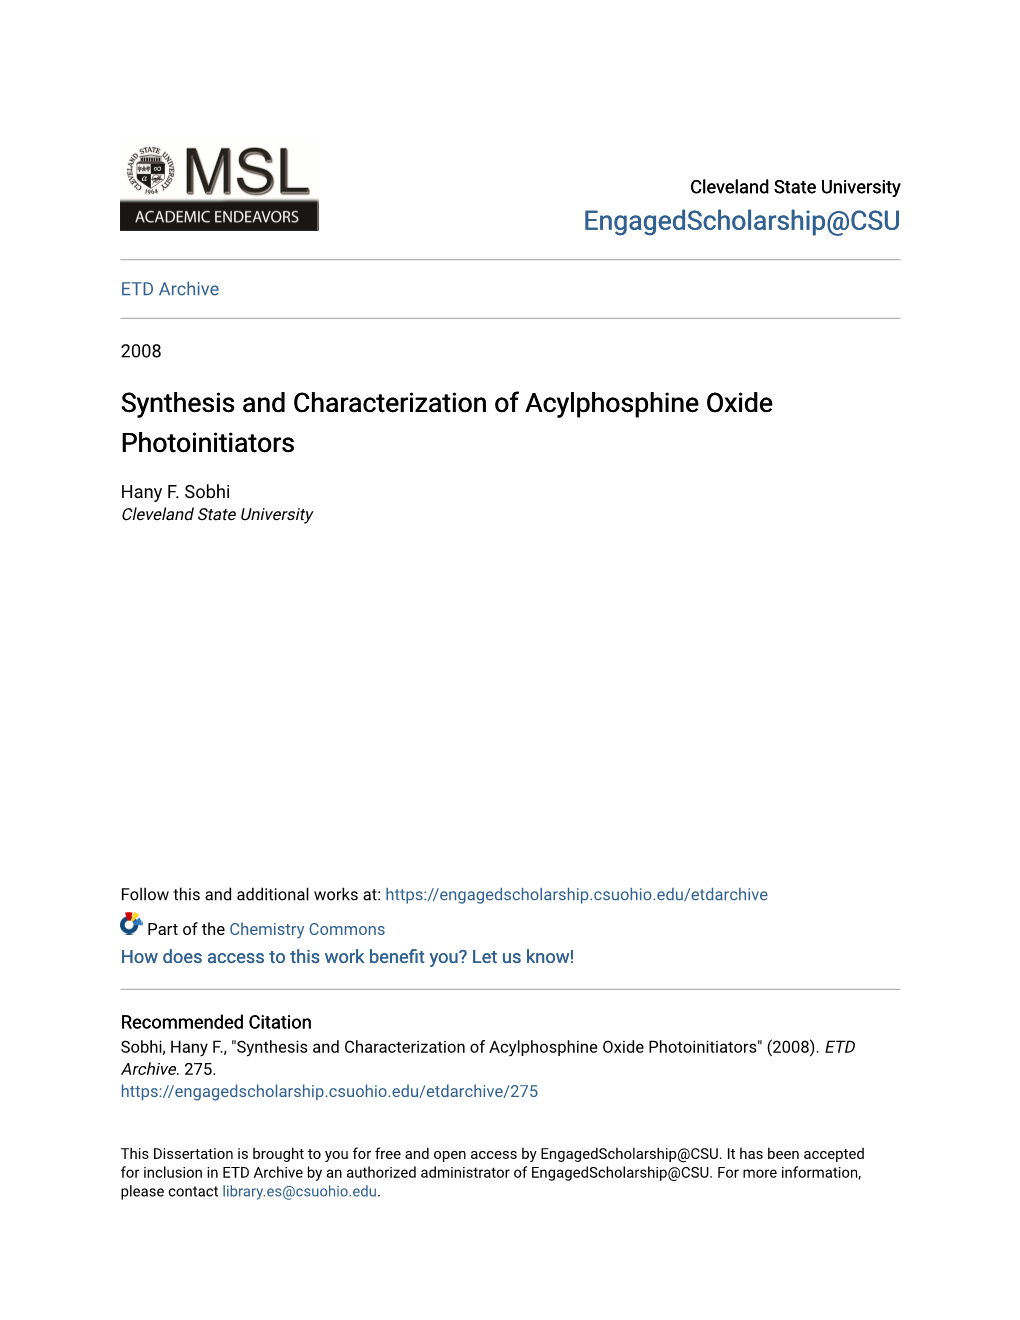 Synthesis and Characterization of Acylphosphine Oxide Photoinitiators